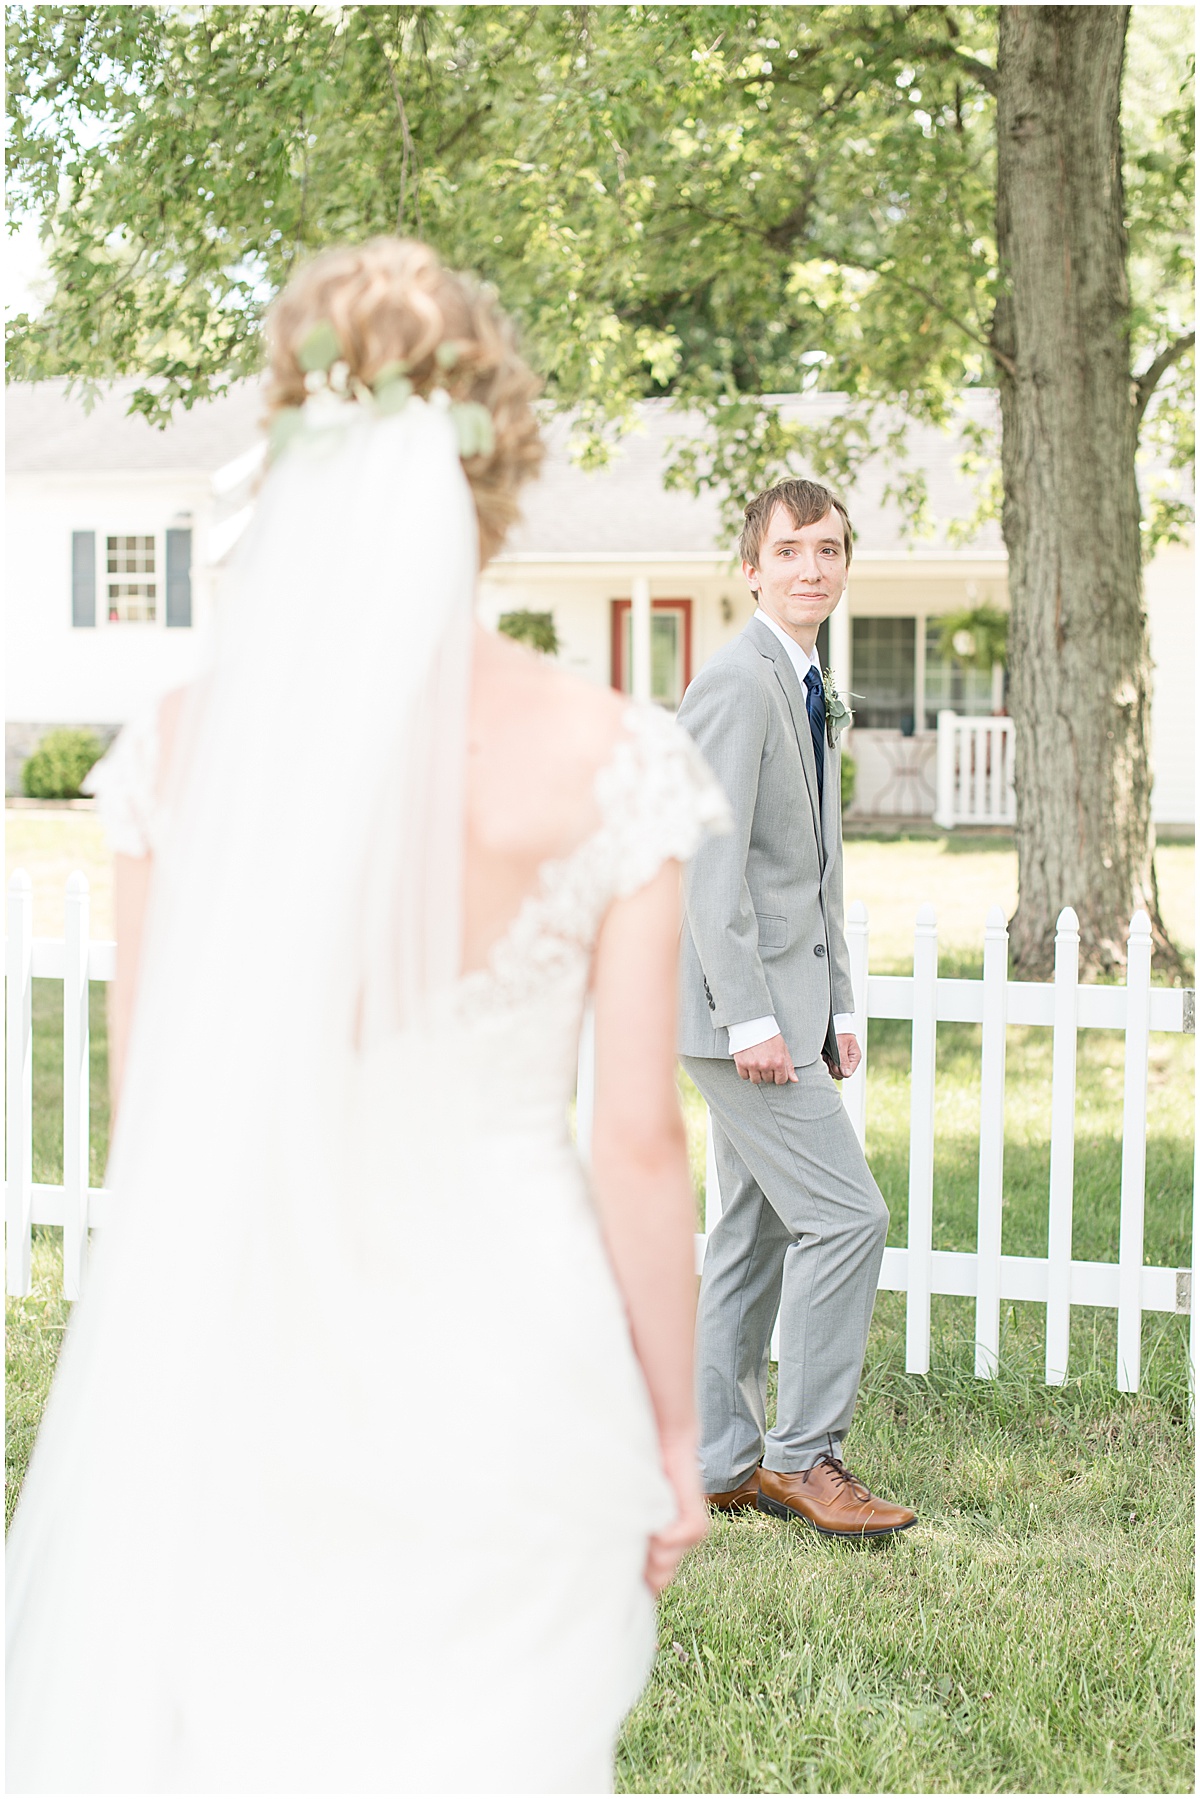 Bride and groom's first look before wedding at The Matterhorn in Elkhart, Indiana